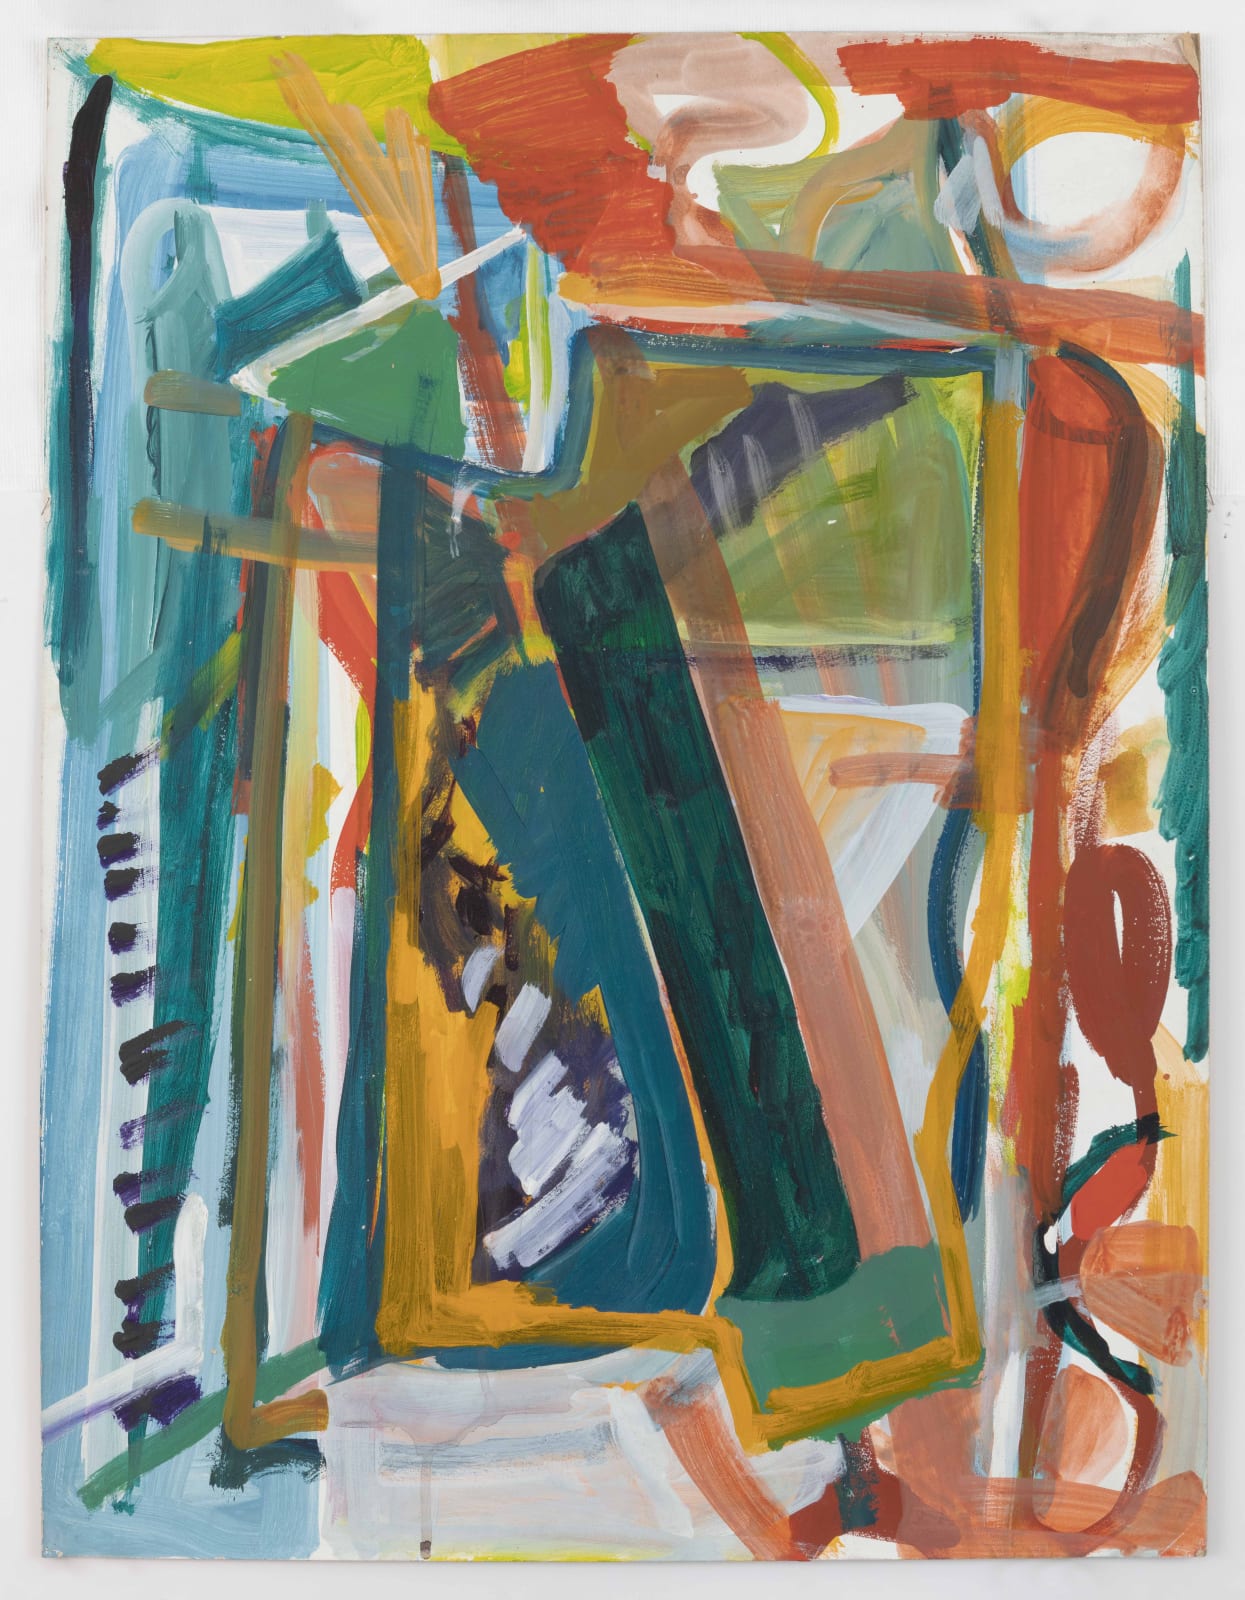 Shirley Jaffe Untitled, 1970 ca. Mixed media on paper 77,5 x 64 x 3,5 cm (30 1/2 x 25 3/16 x 1 3/8 in) framed